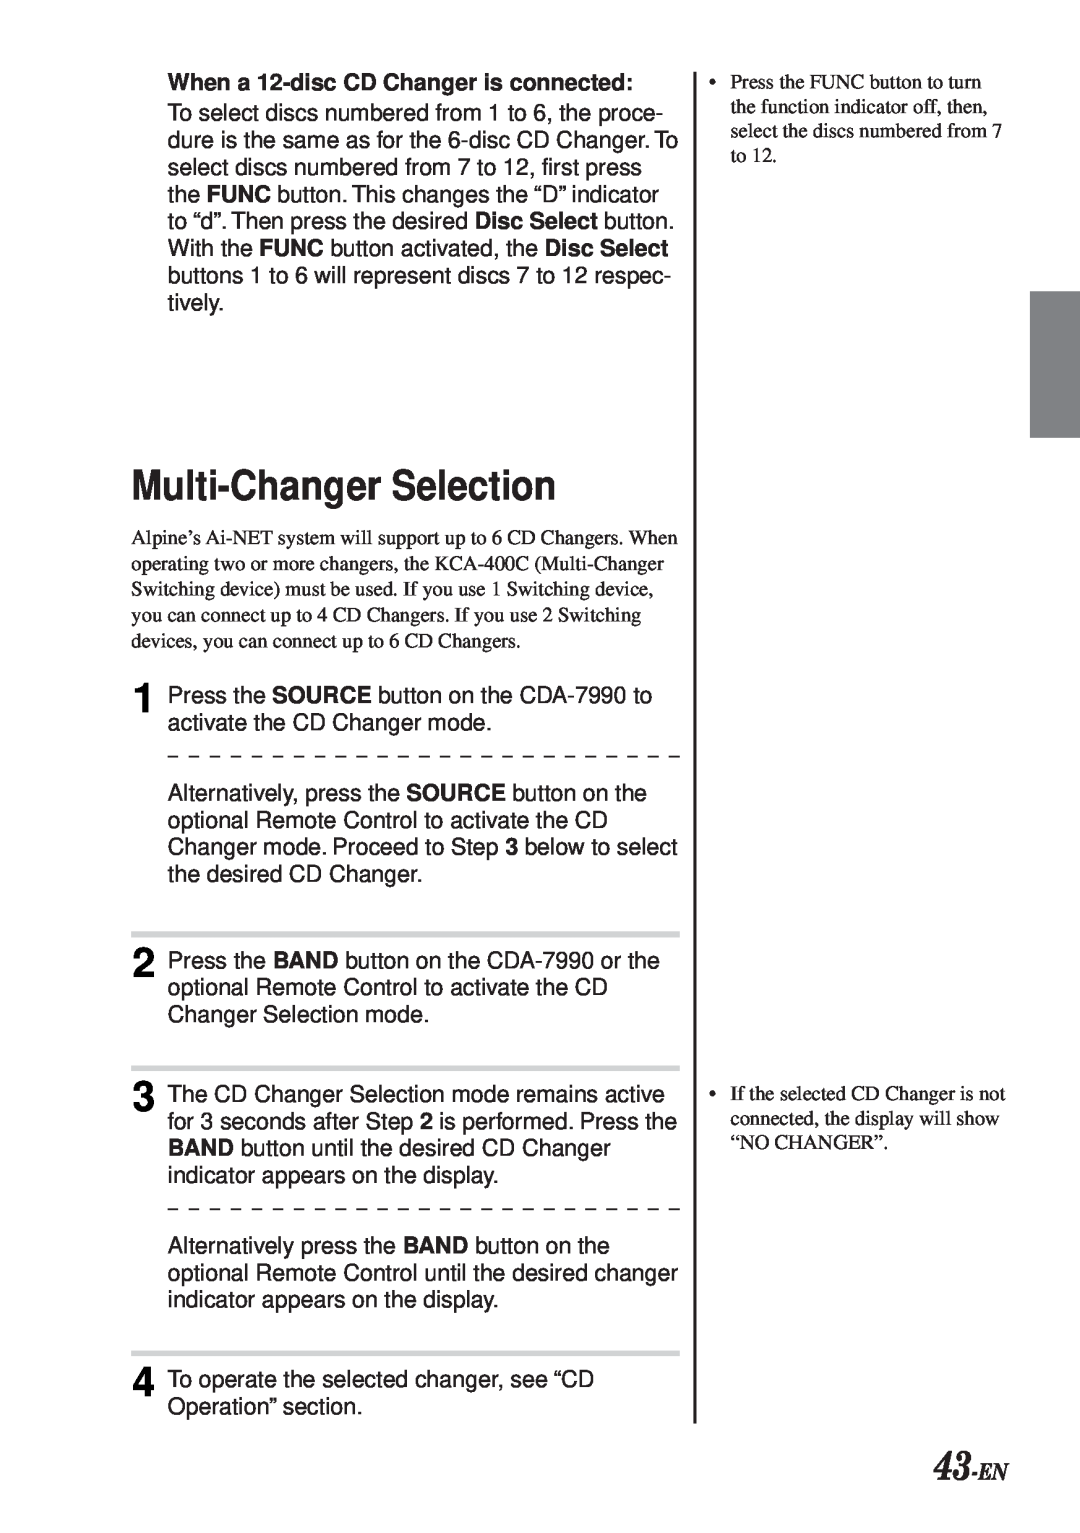 Alpine CDA-7990 manual Multi-ChangerSelection, 43-EN, When a 12-discCD Changer is connected 